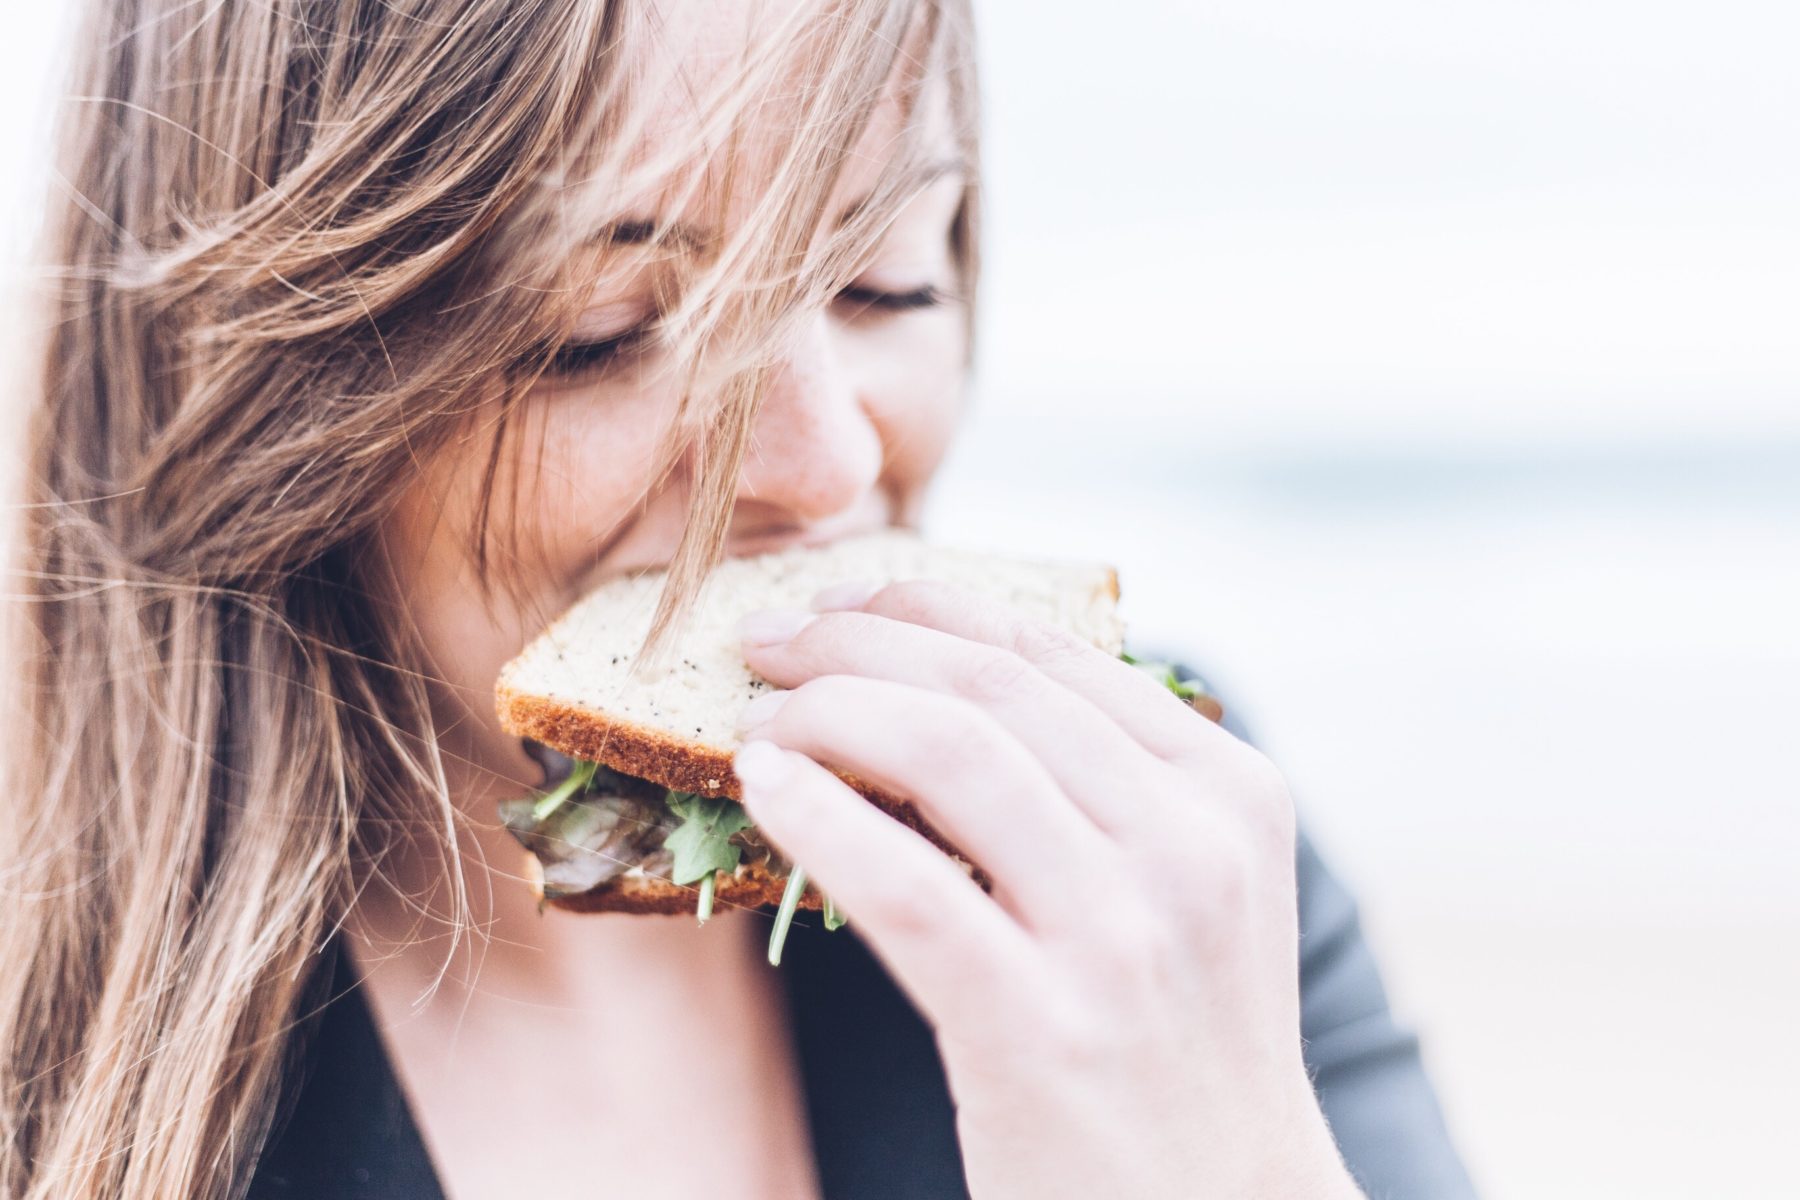 A young woman eating a sandwich.